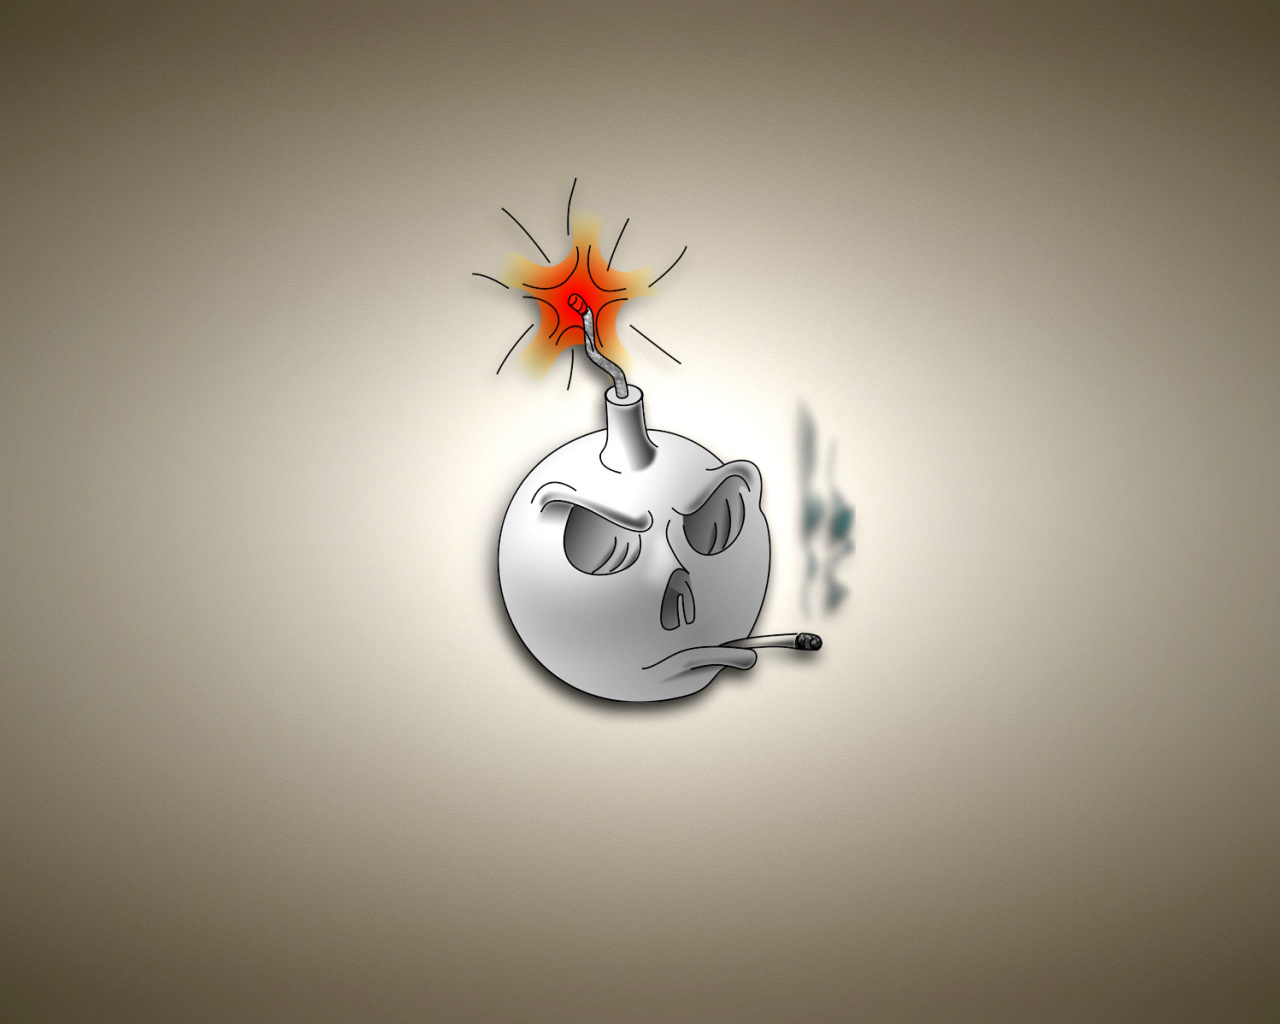 Bomb with Wick wallpaper 1280x1024